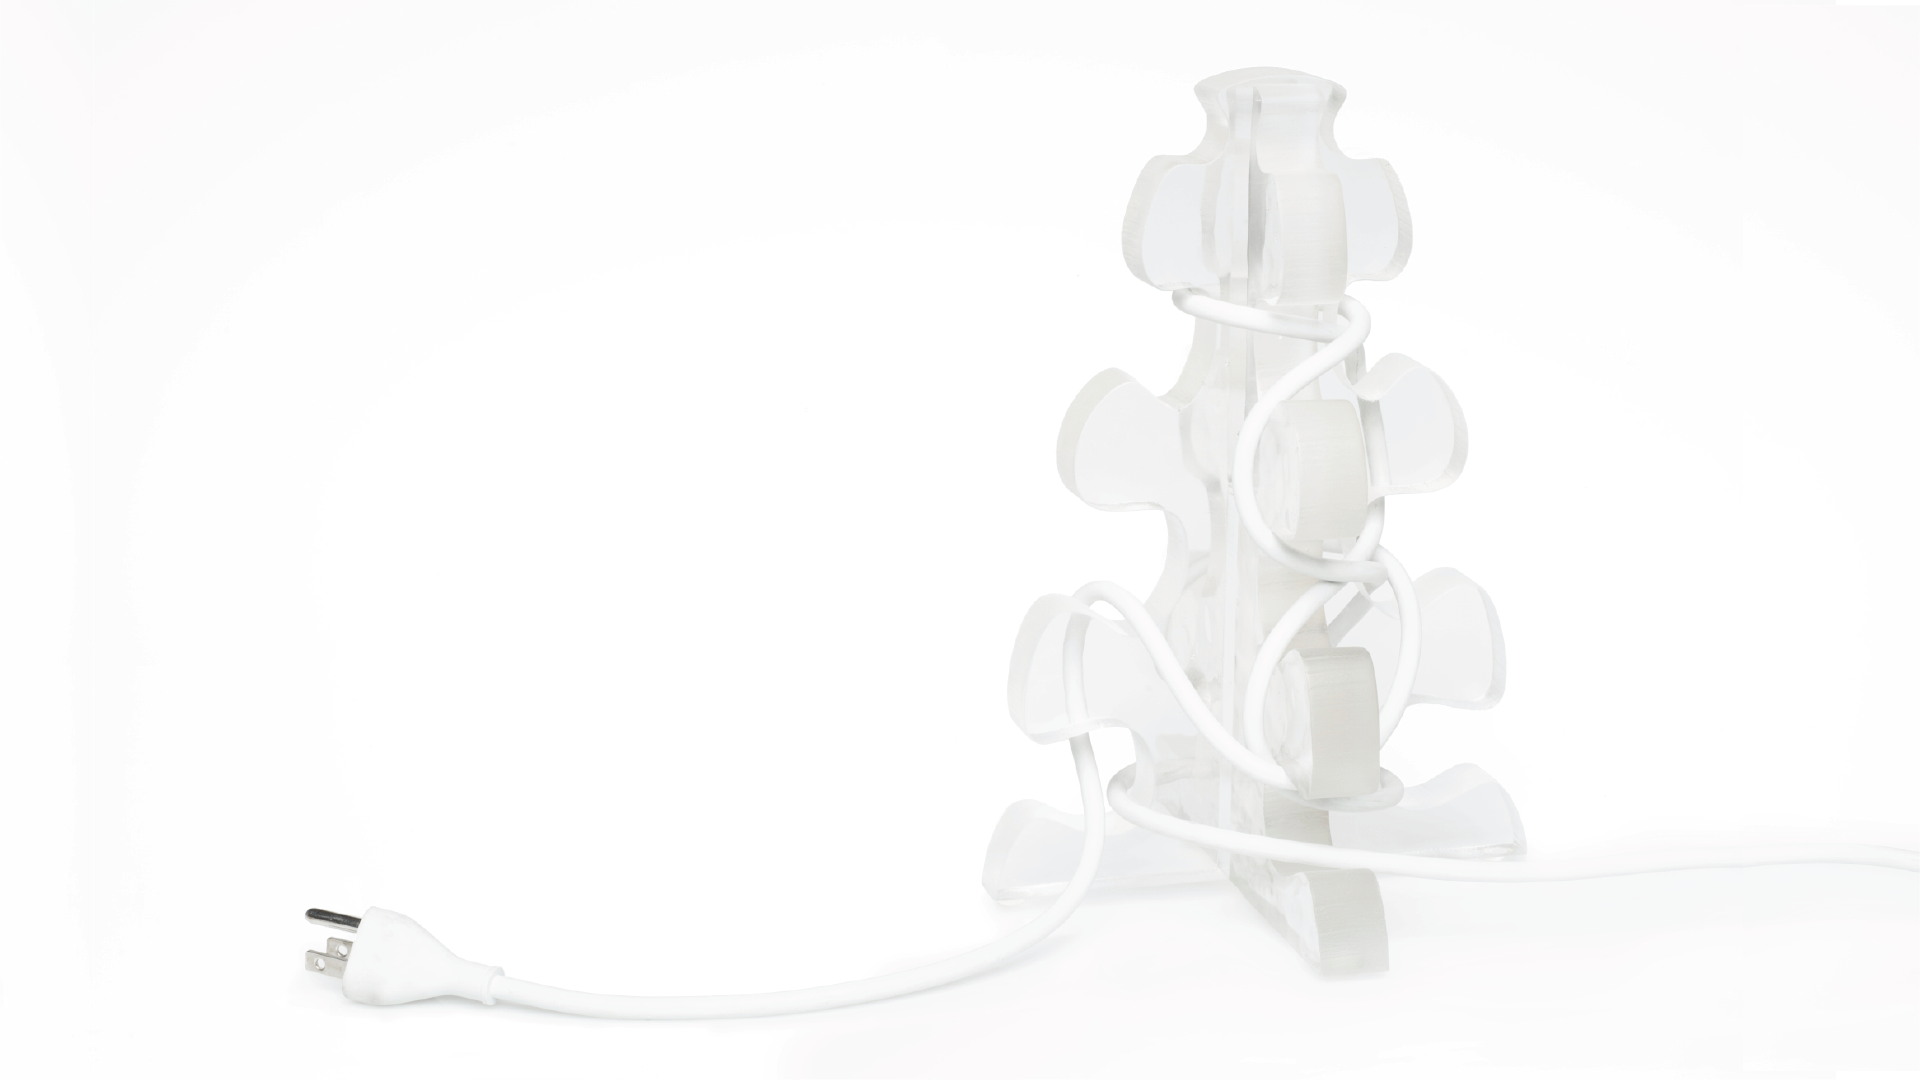 Frost glass cord organizer placed on the floor. A electric cord is wrapped around the product.